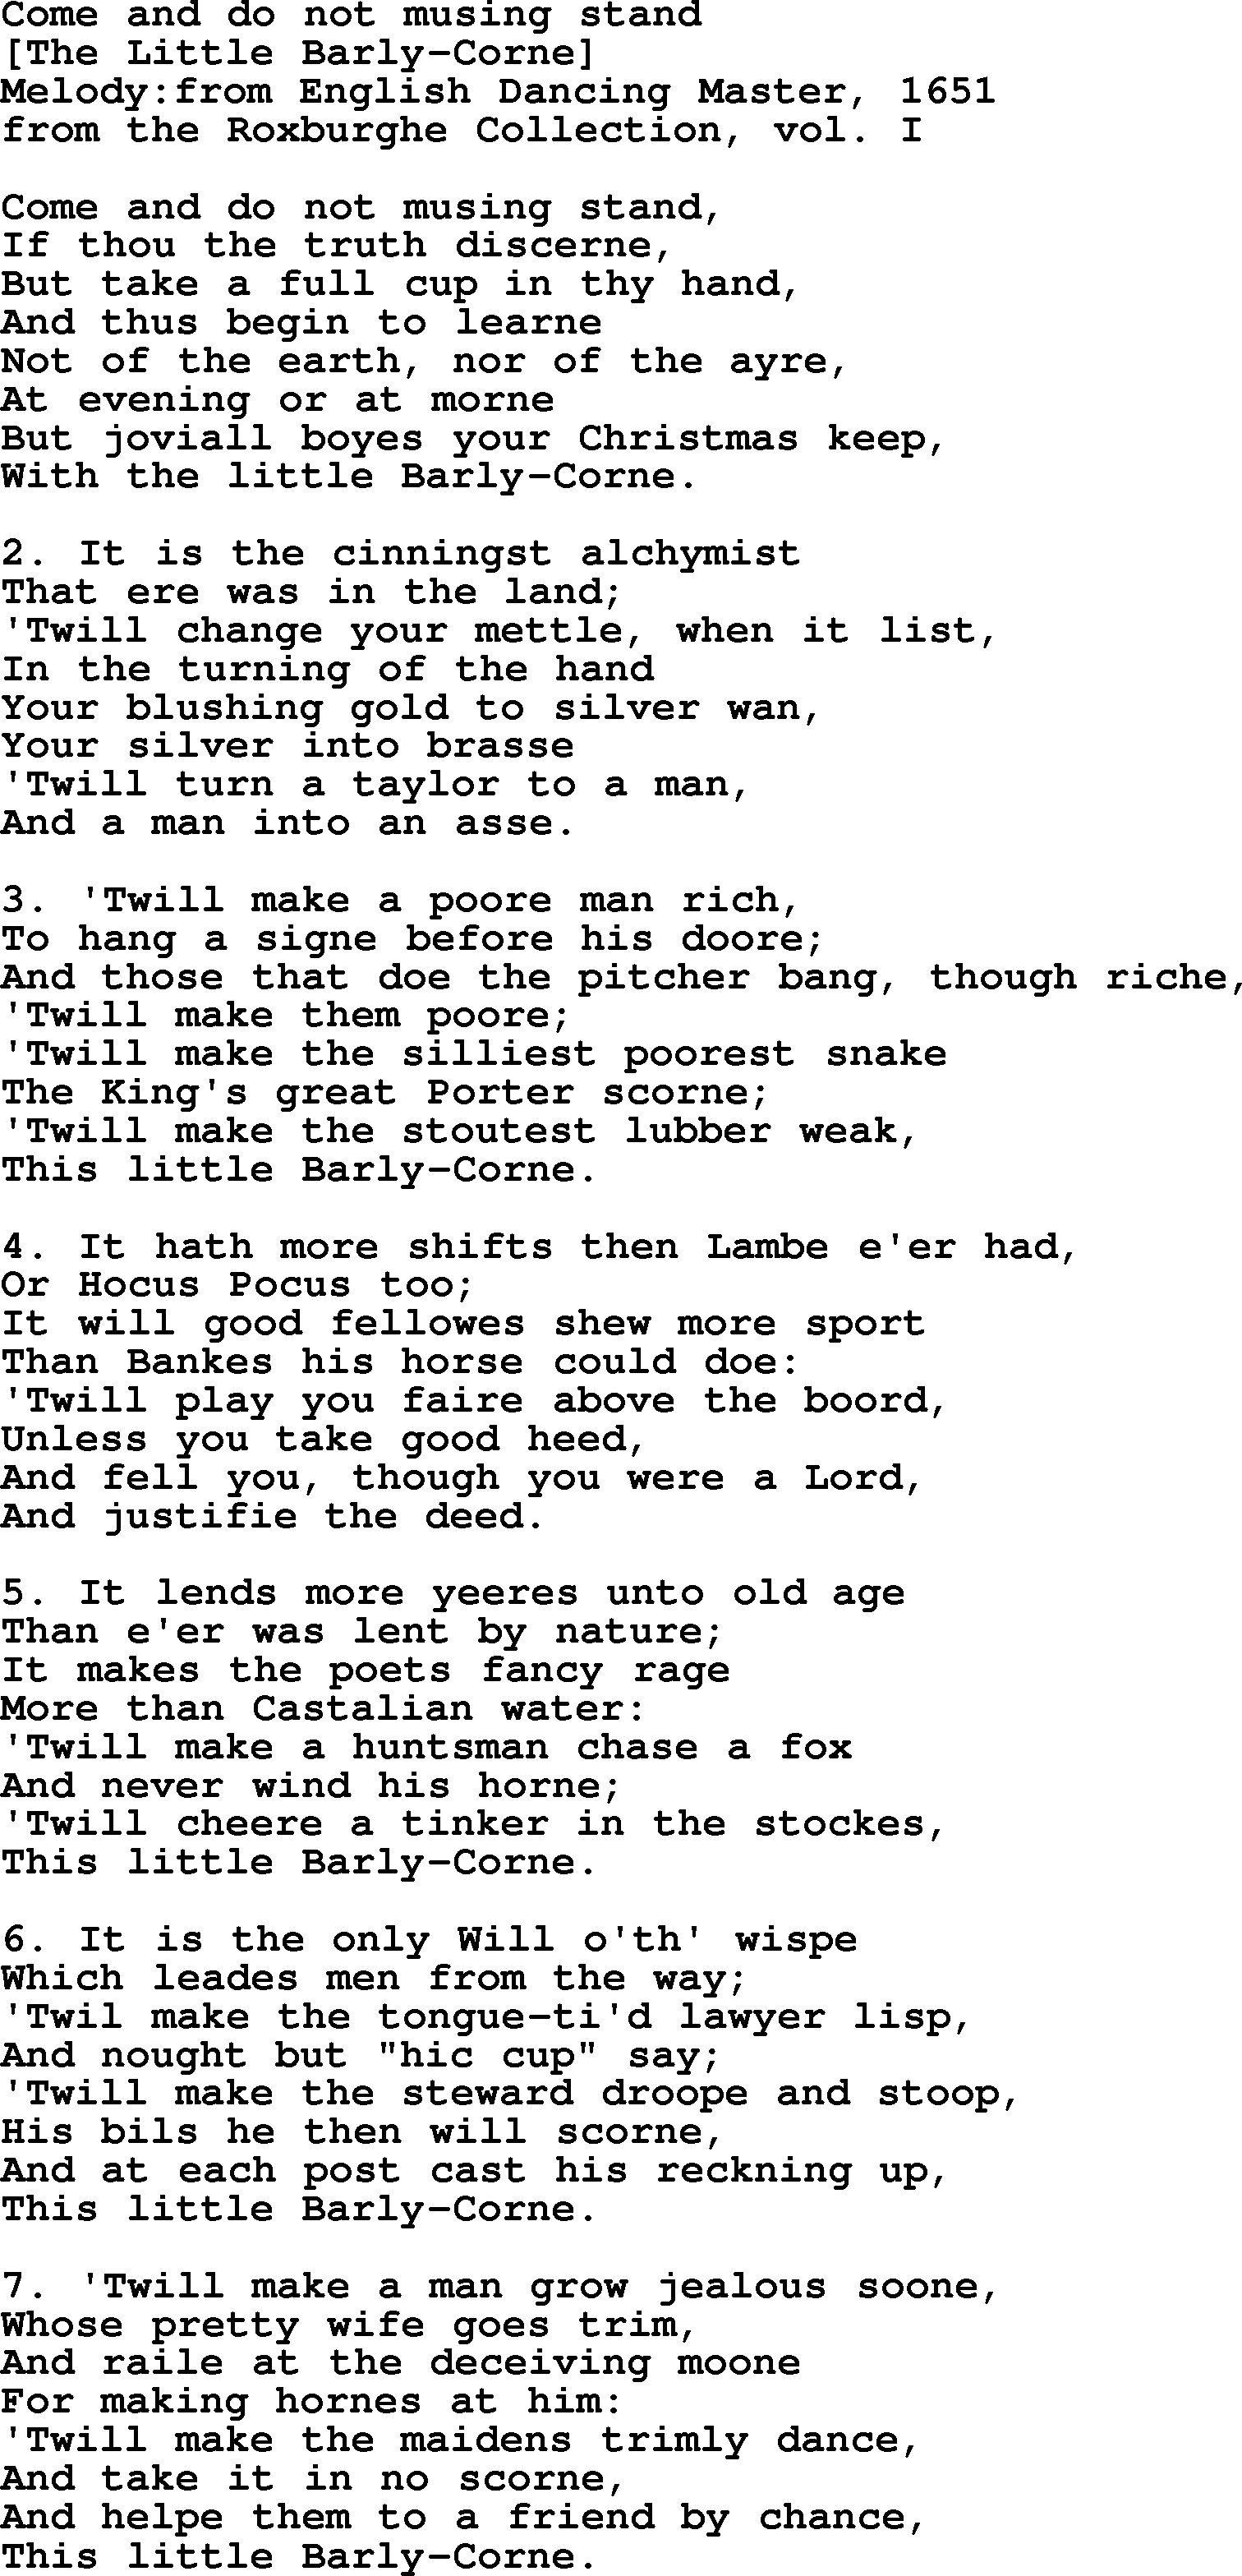 Old English Song: Come And Do Not Musing Stand lyrics